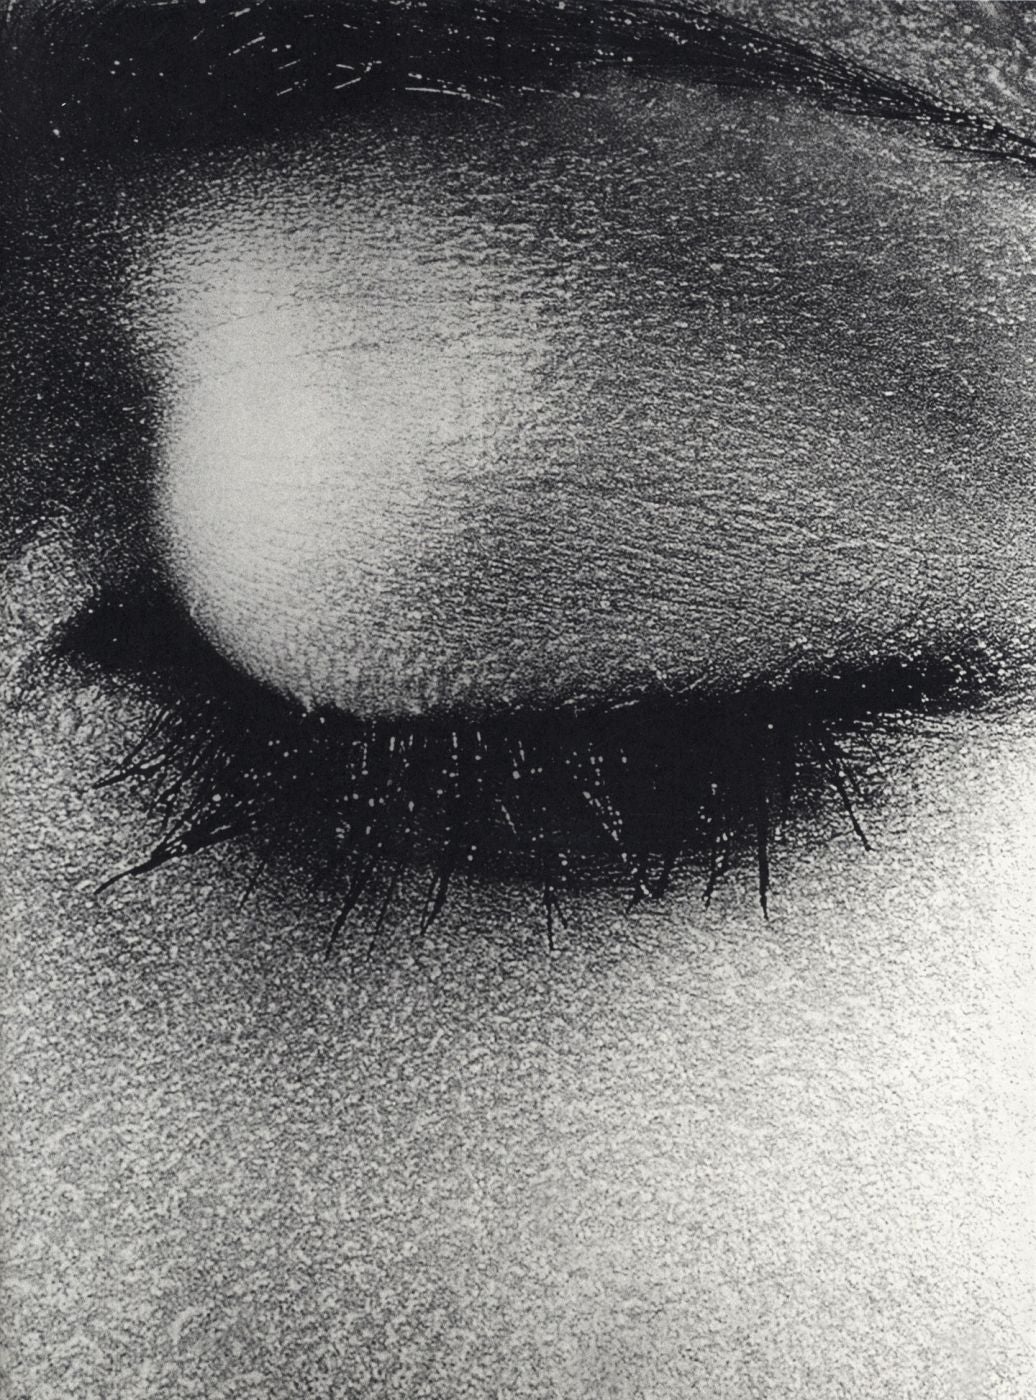 Daido Moriyama: Vintage Prints (Shine Gallery), Limited Edition (with Type-C Print) [SIGNED]